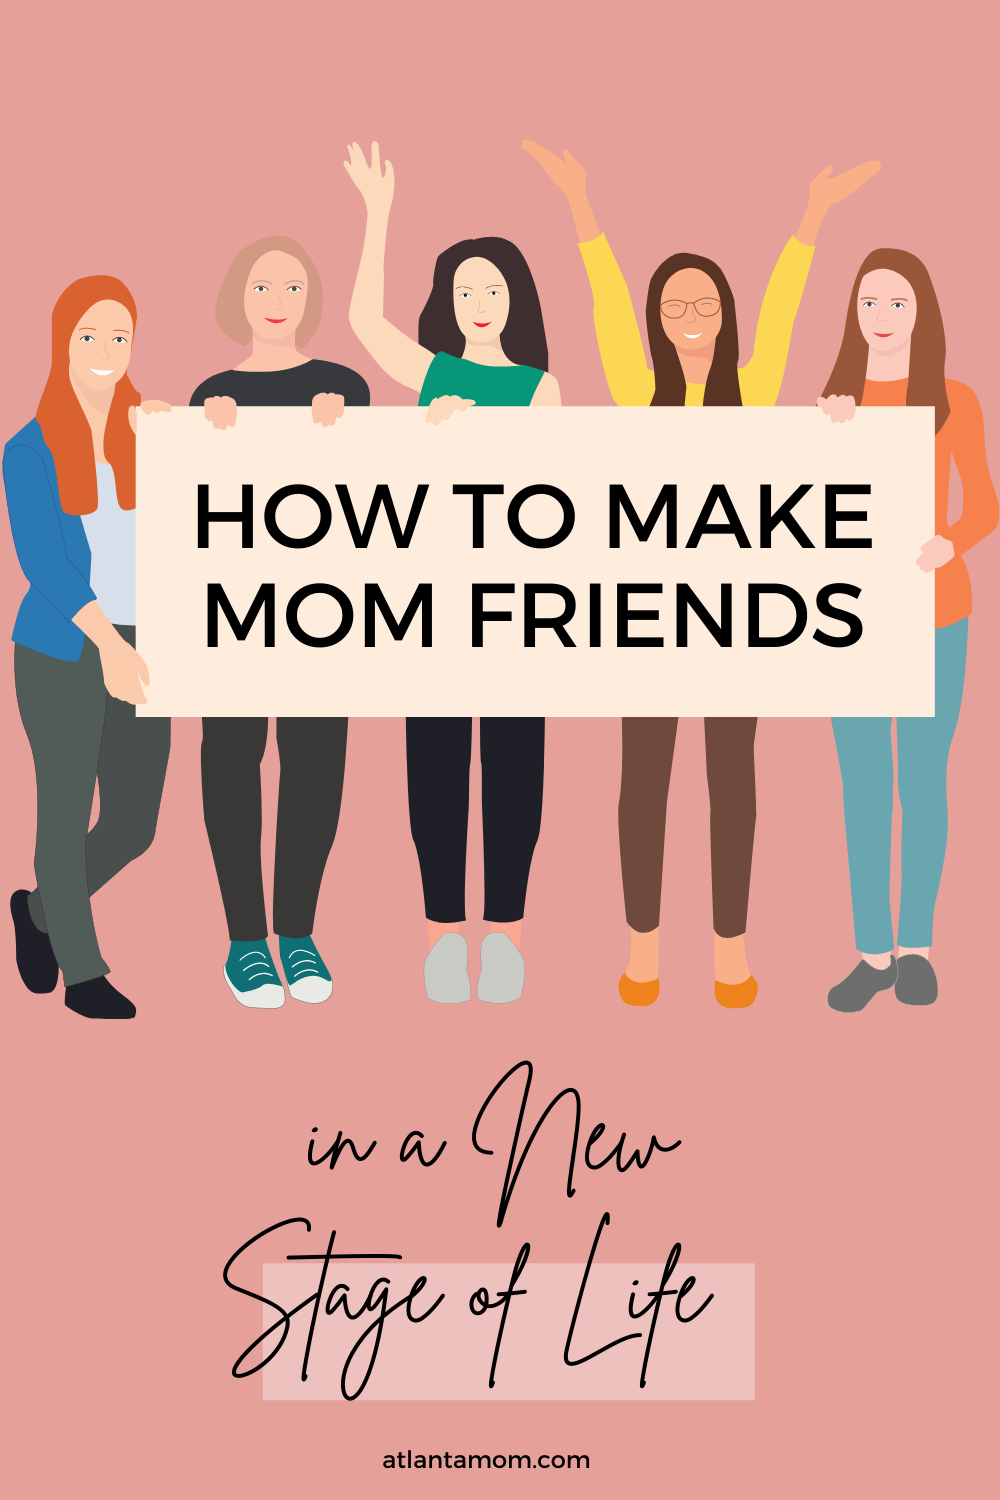 How to Make Mom Friends